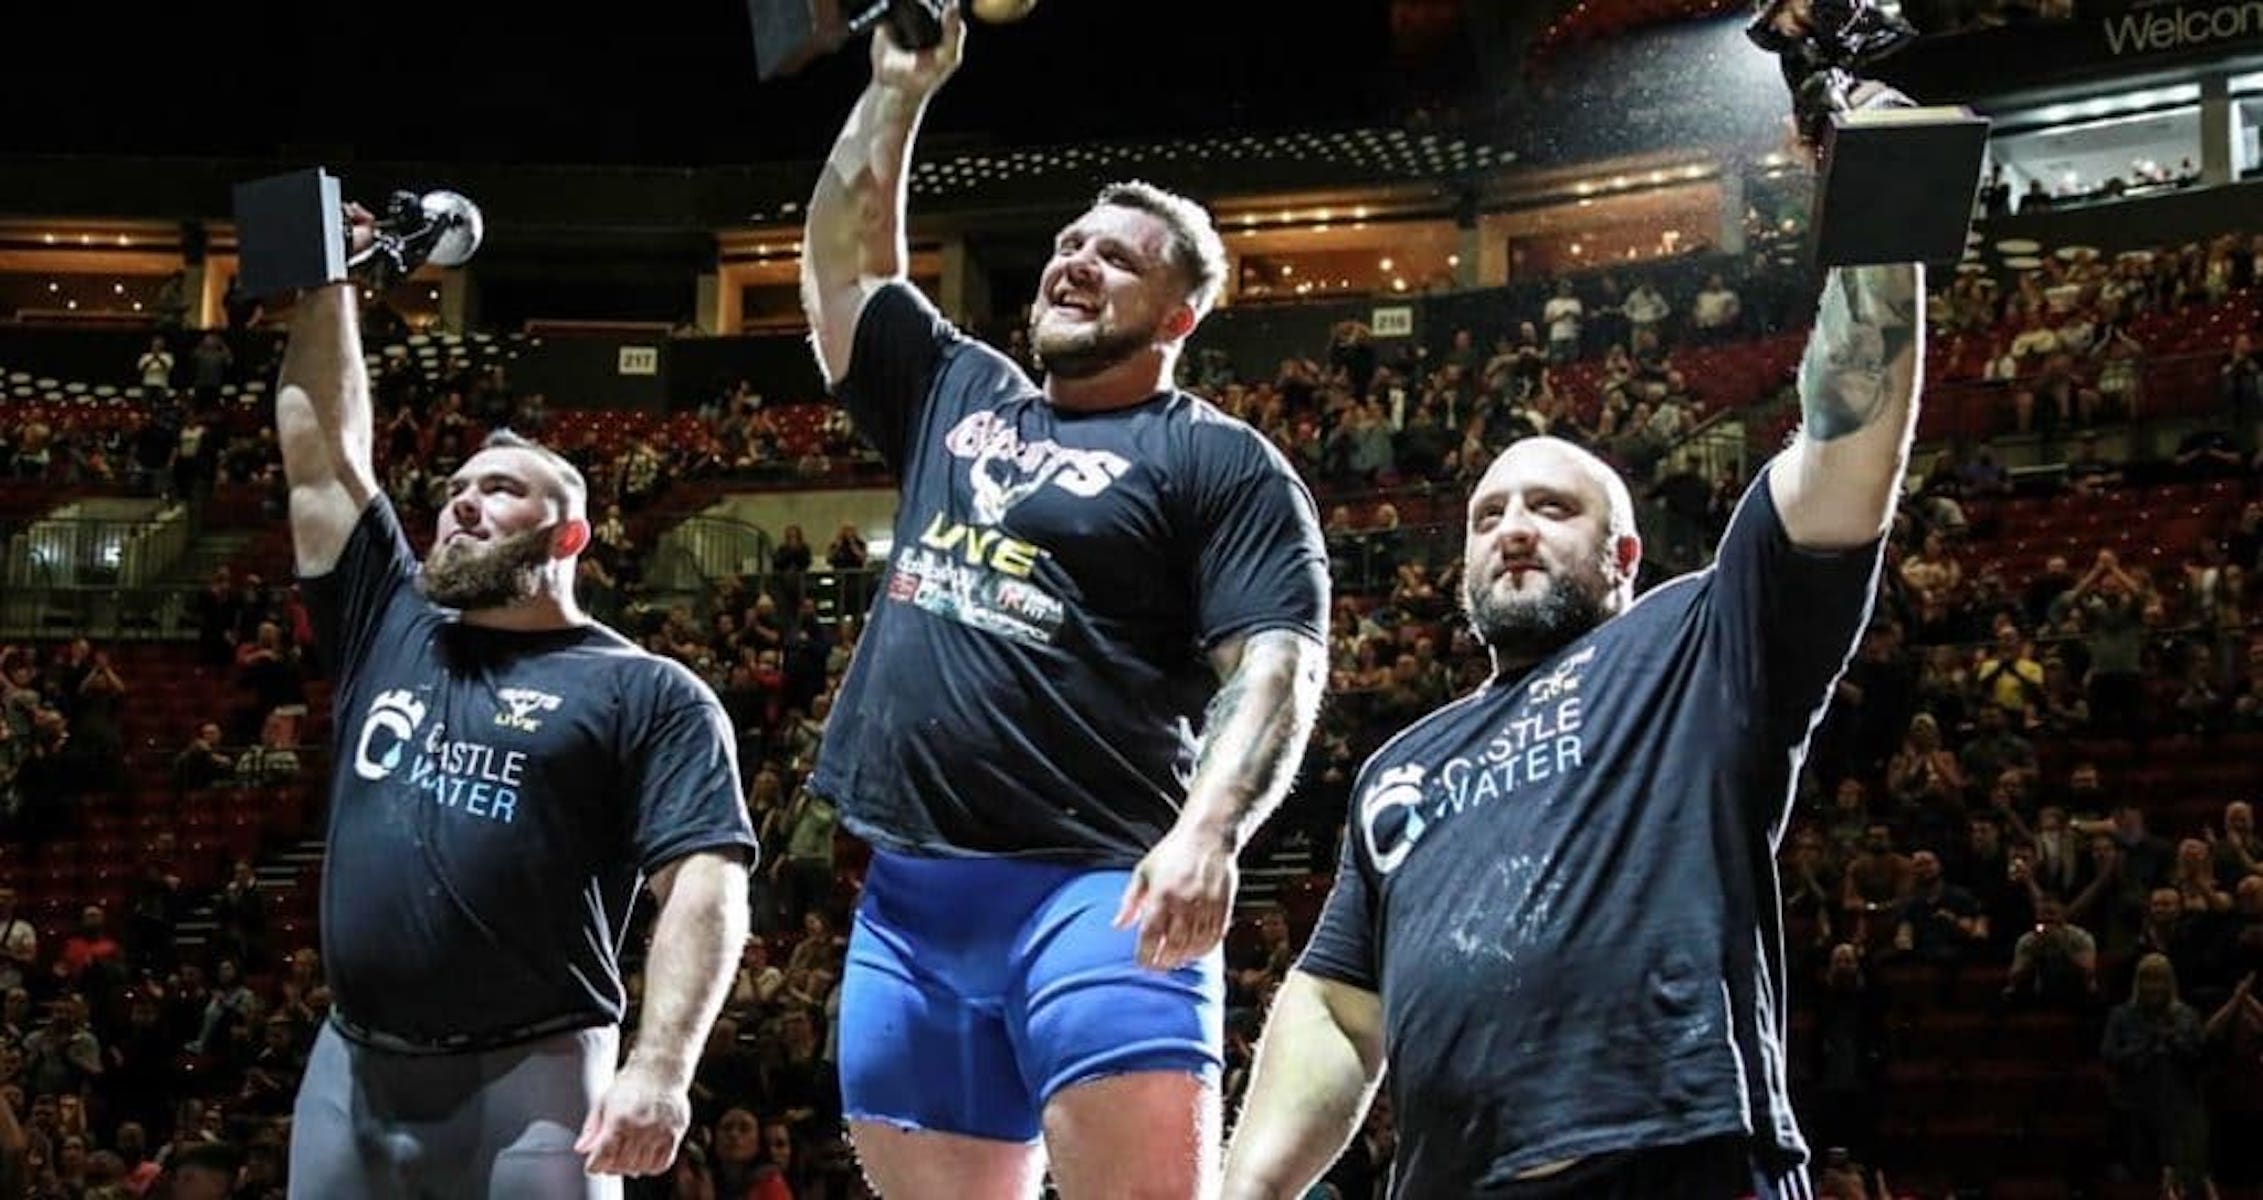 2022 Europe's Strongest Man Lineup Luke Stoltman Prepared To Defend Title